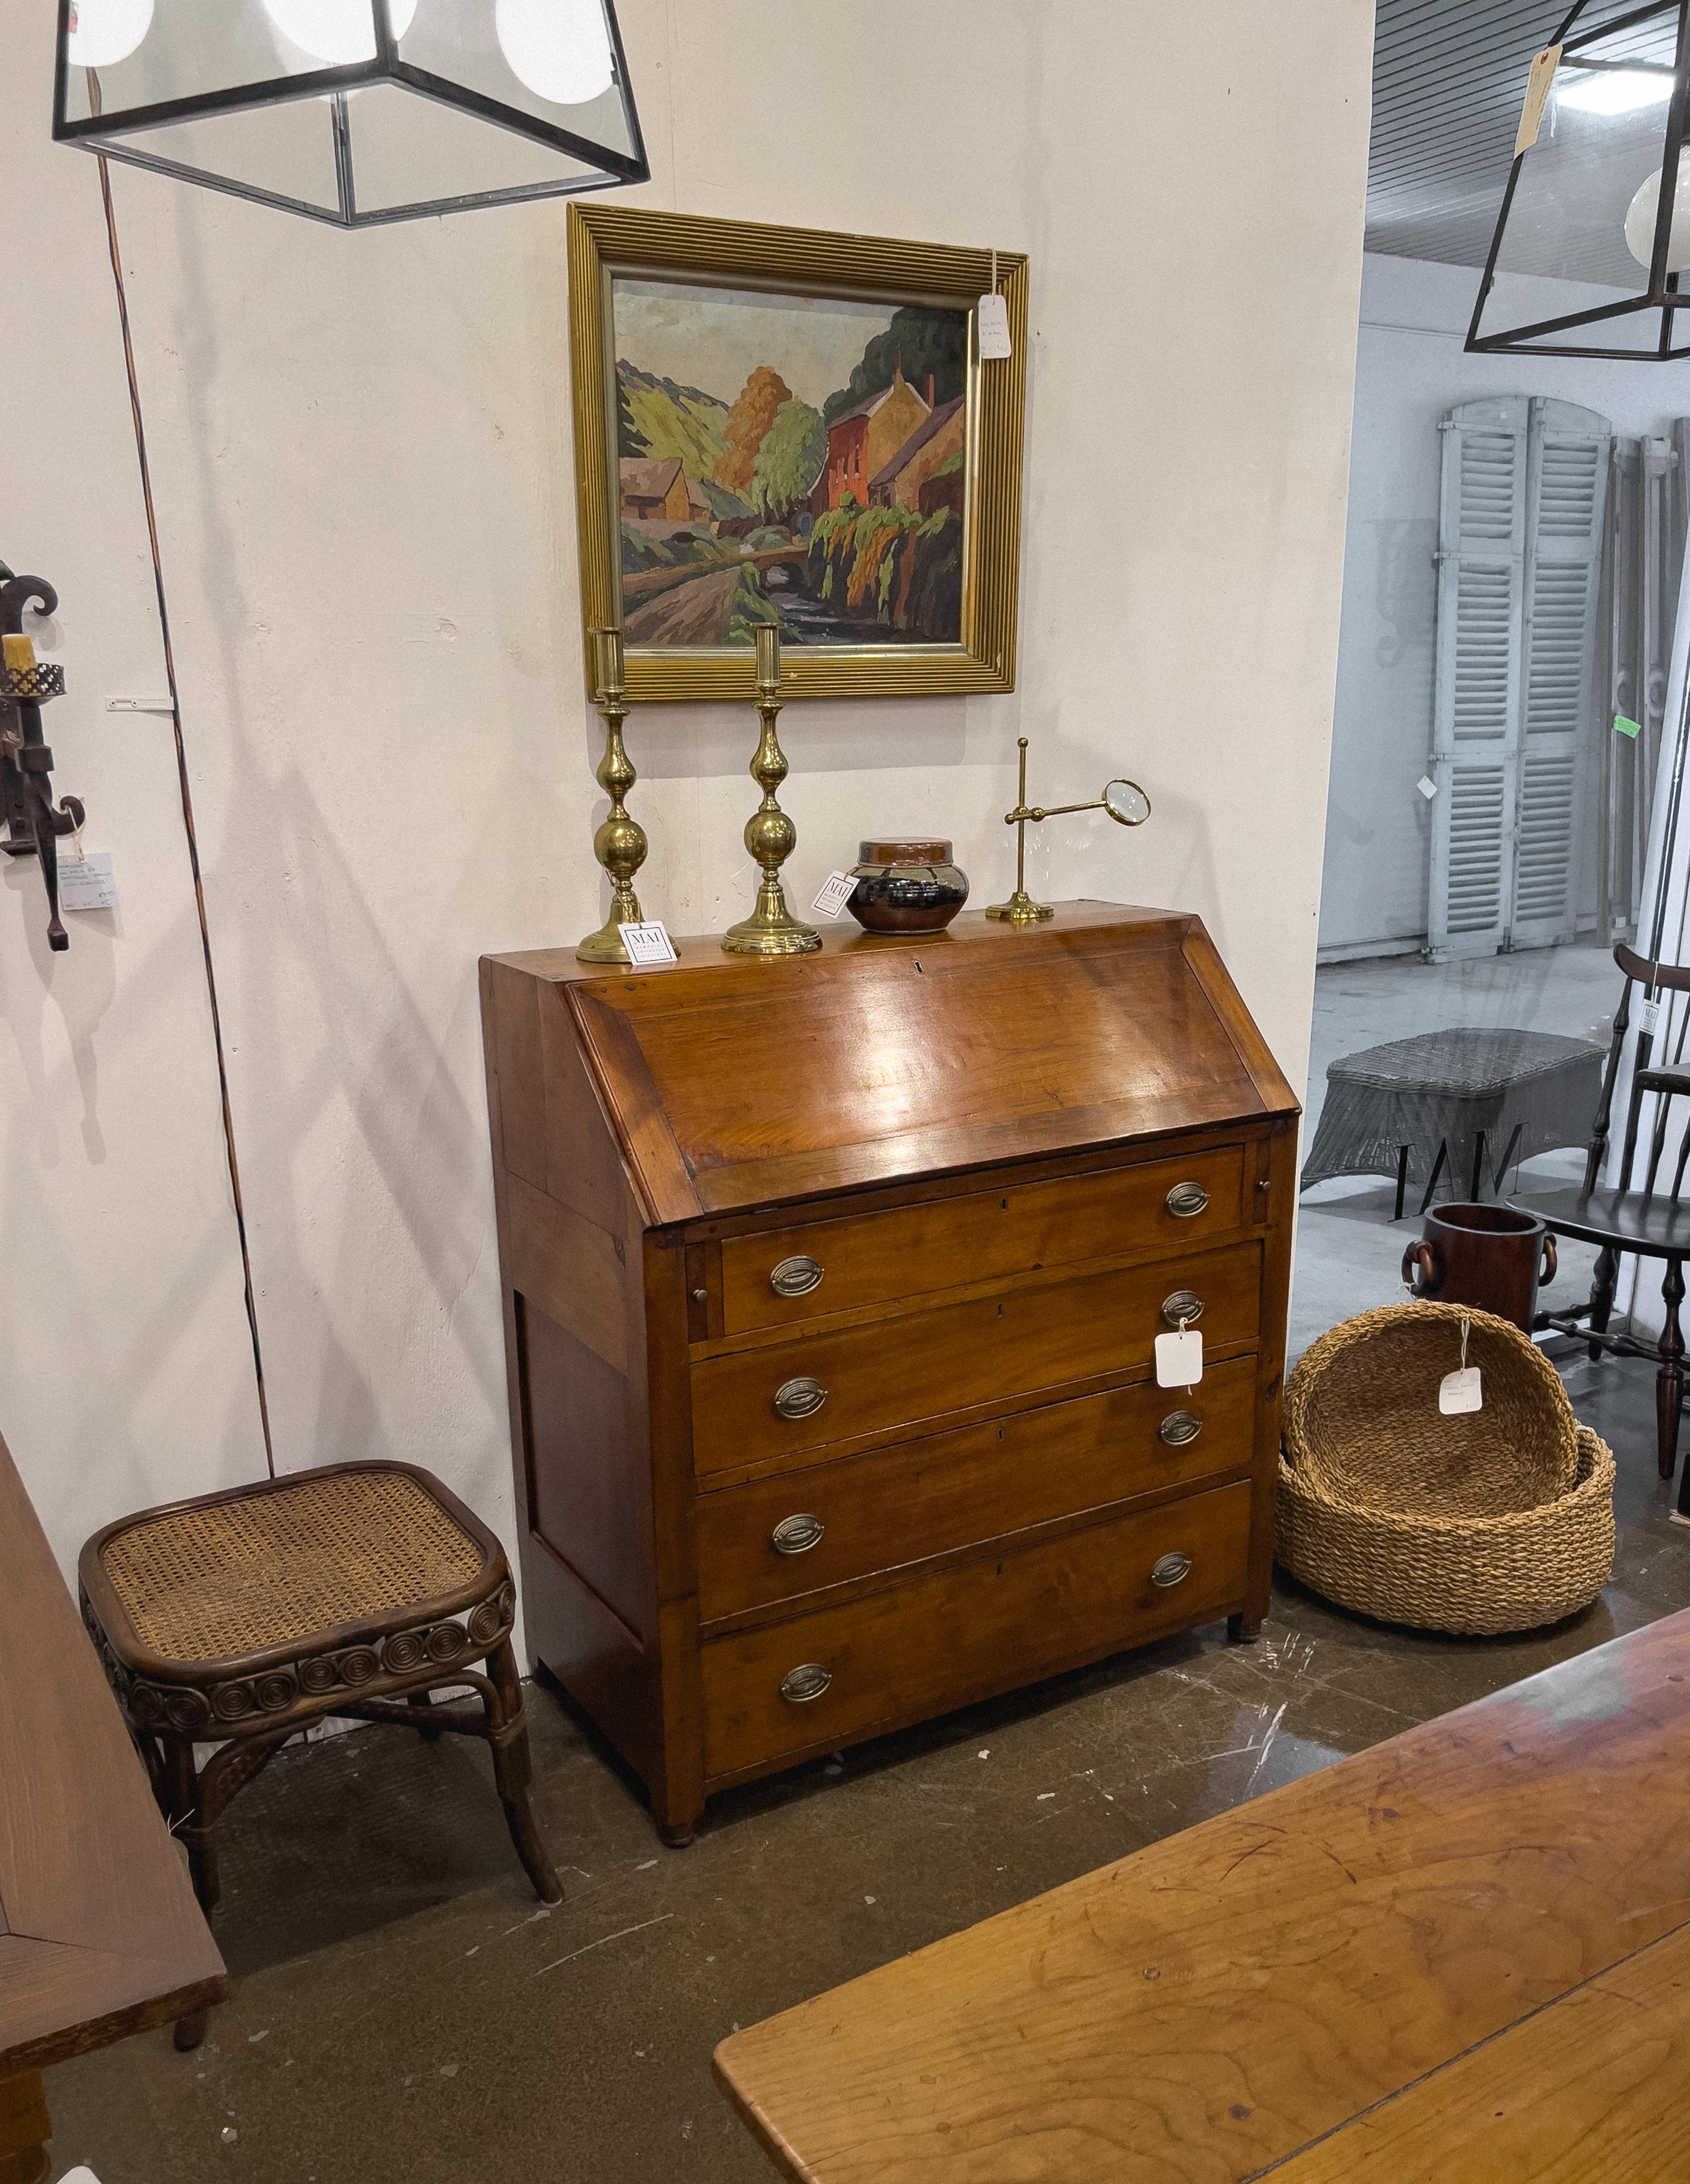 19th century American Slant Front Secretary made from mahogany and pine. The fall front desk is supported by 2 pull out slides, and the inside area contains multiple drawers and cubbies. Underneath there are 4 graduating drawers.